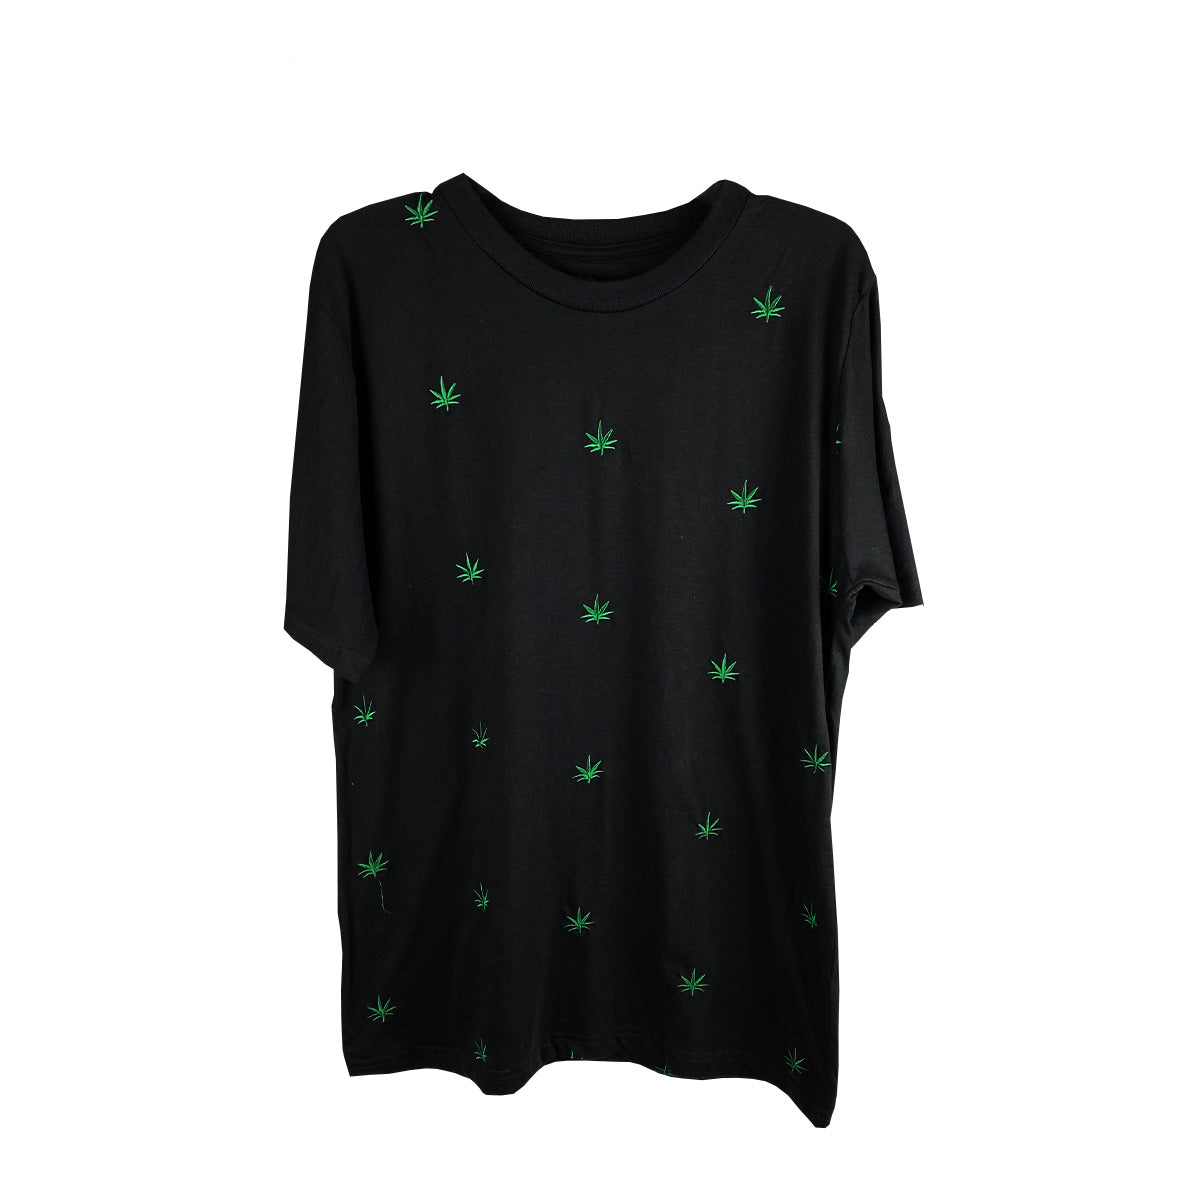 Green Cannabis Leaf Embroidered 100% Cotton T-Shirt, Pack of 6 Units 1S, 2M, 2L, XL